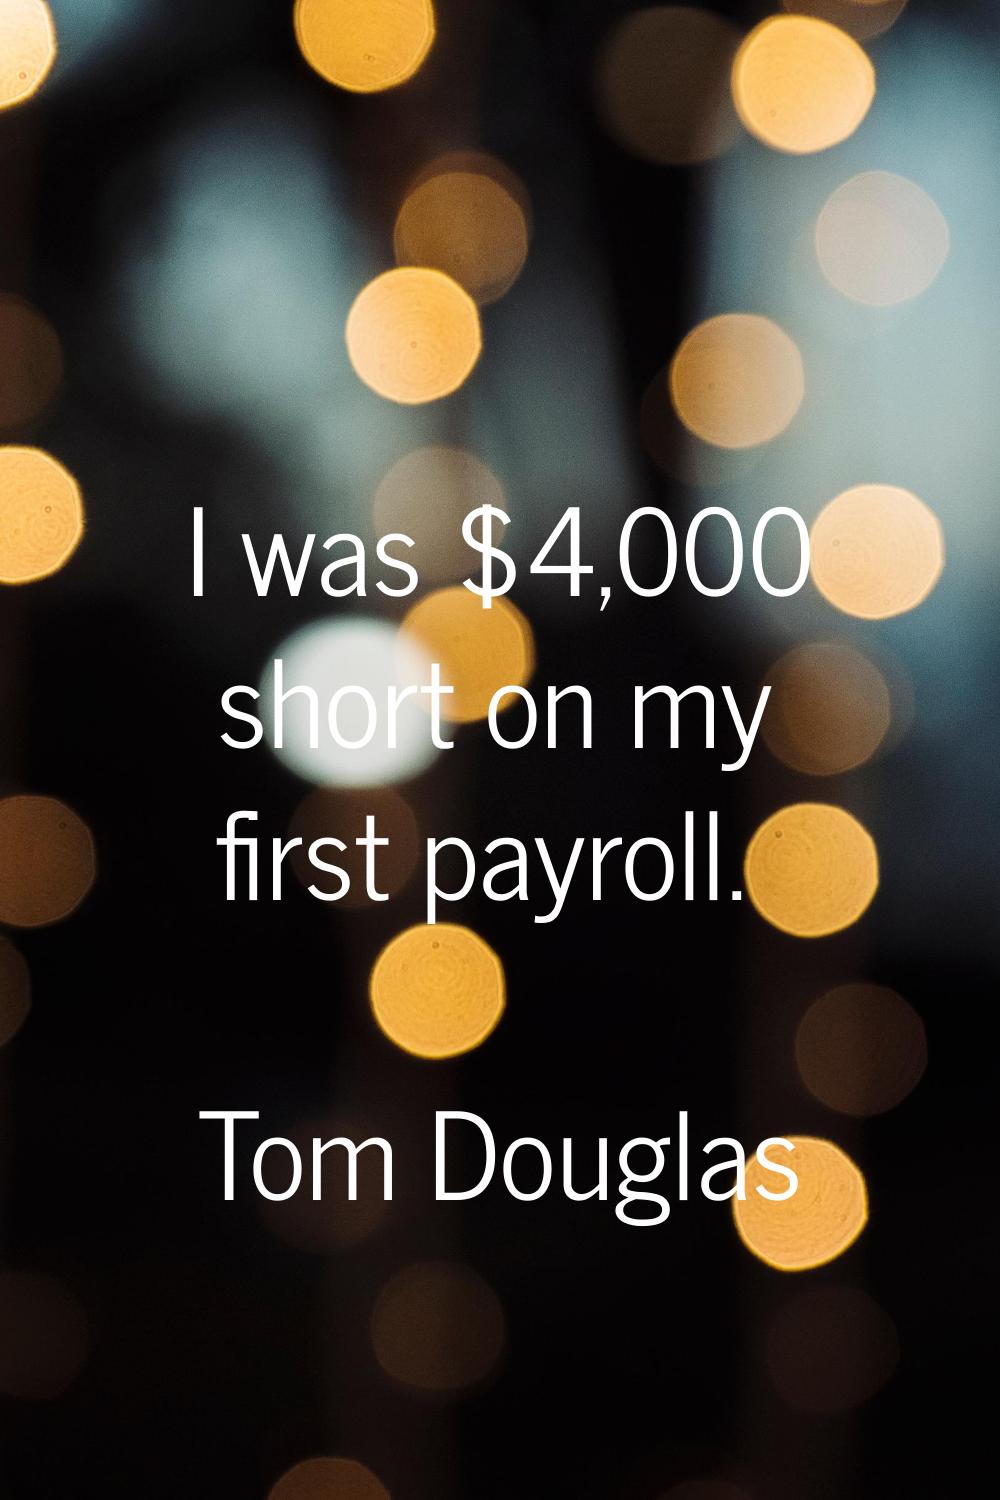 I was $4,000 short on my first payroll.